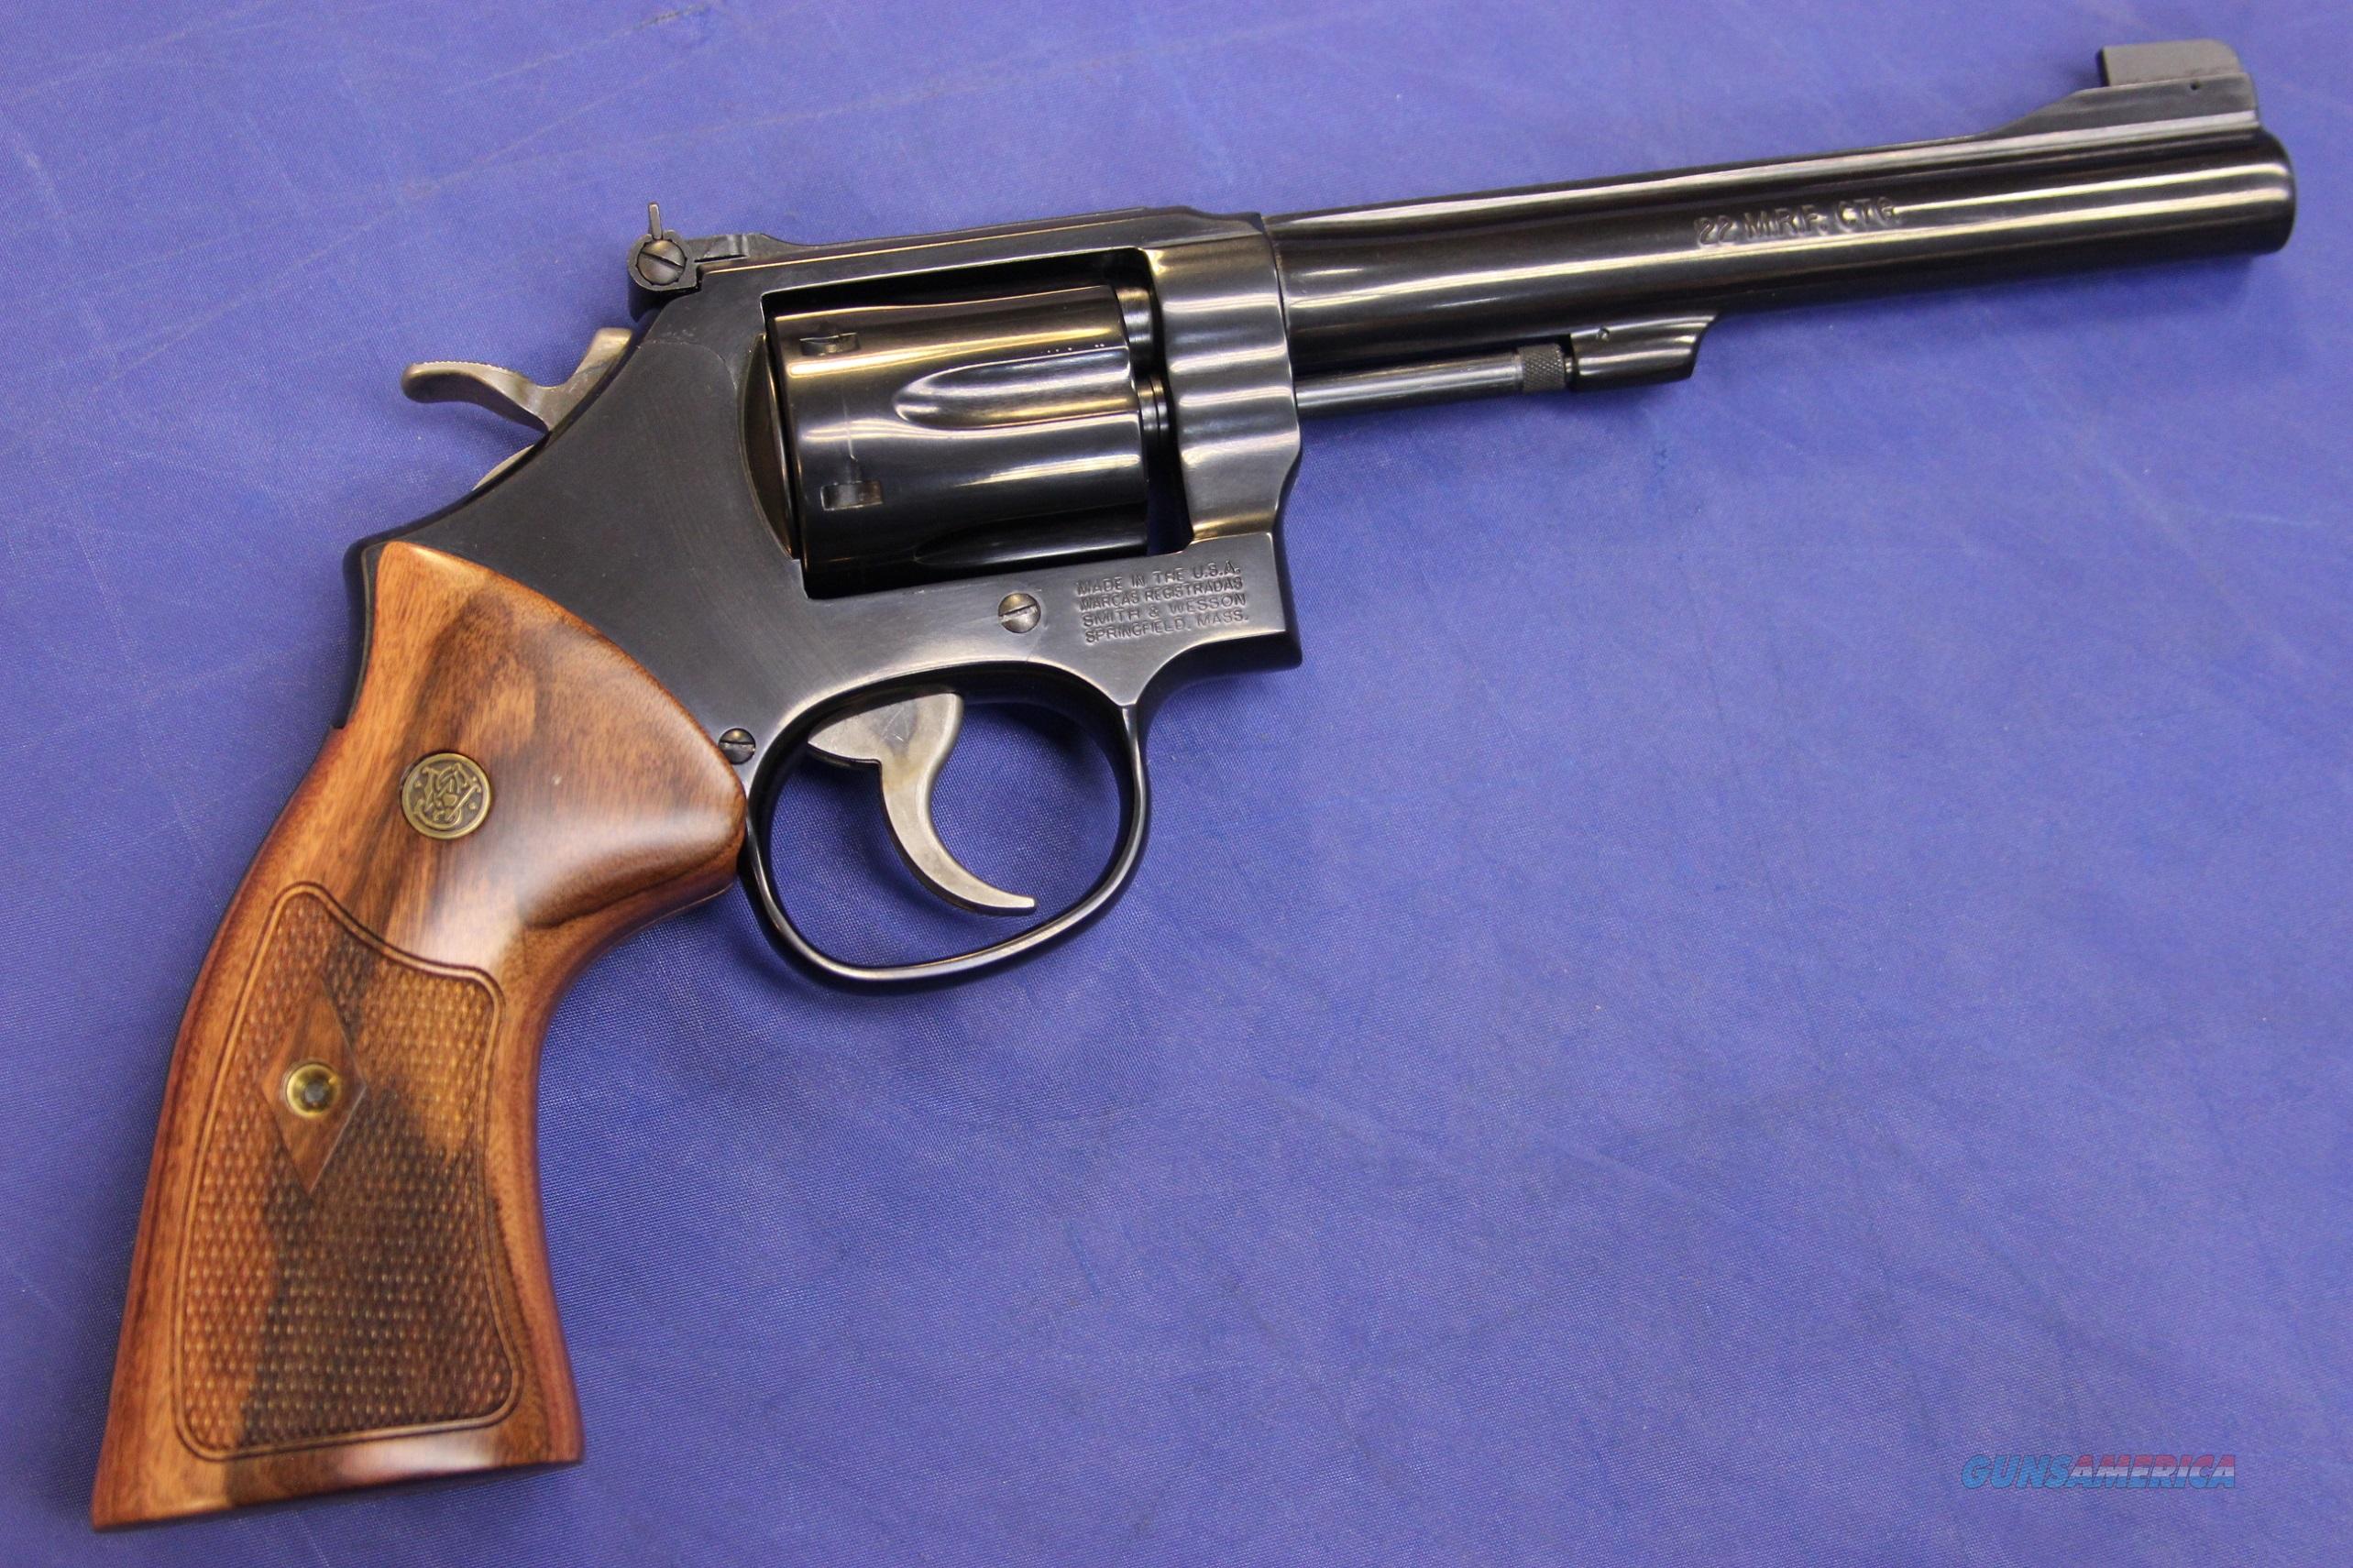 Smith And Wesson Model 48 22 Magnum For Sale At 994674546 8629